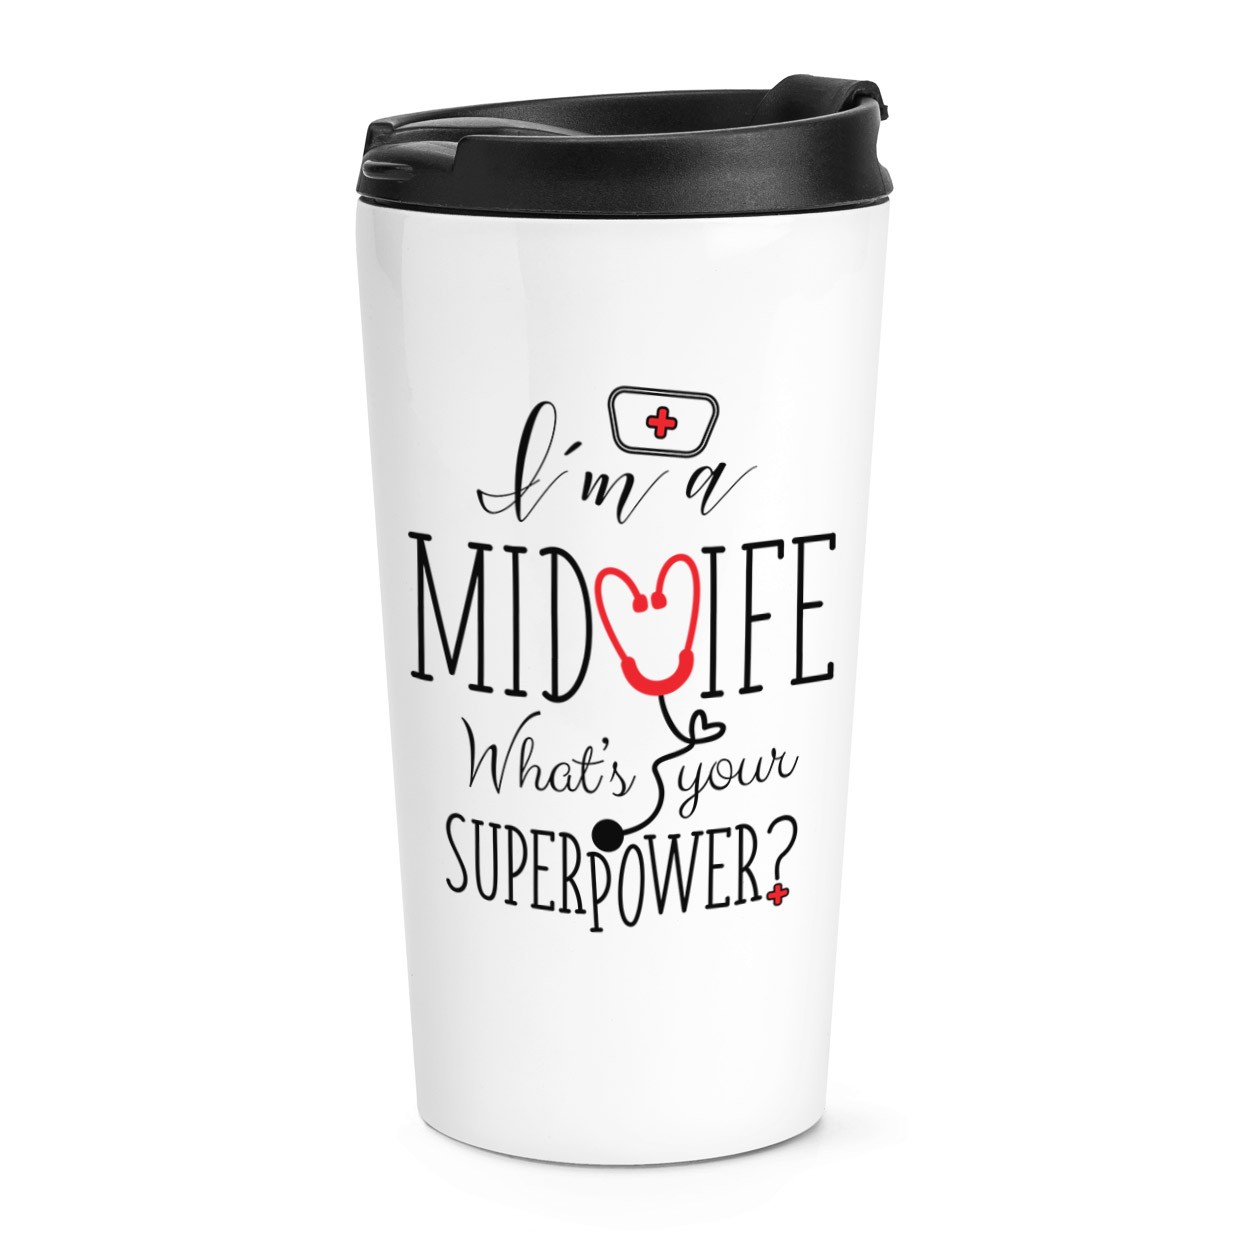 I'm A Midwife What's Your Superpower Travel Mug Cup